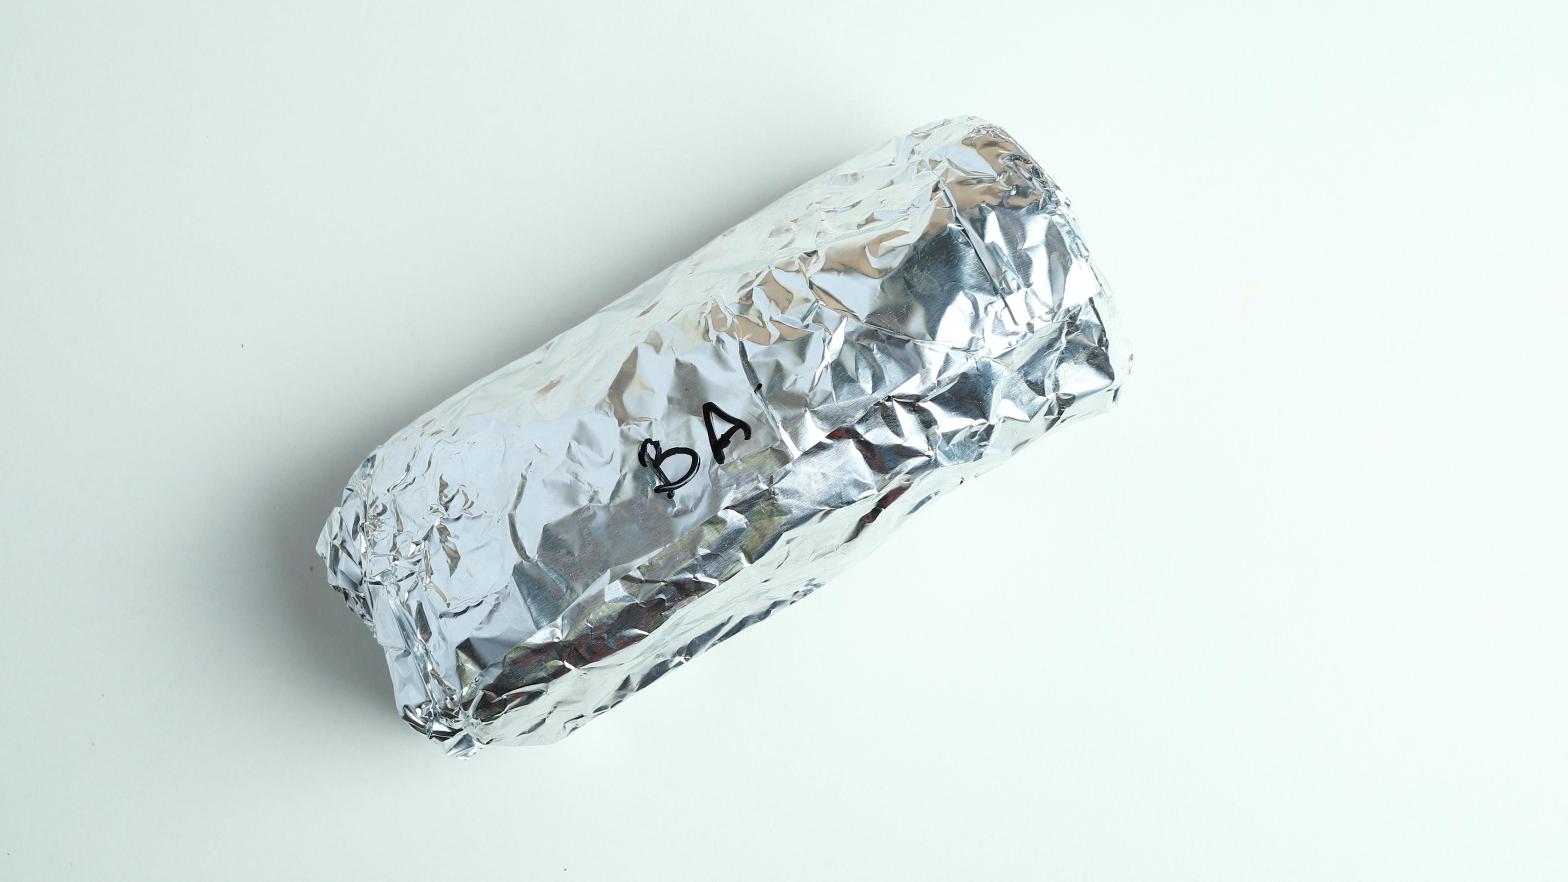 As long as the burrito isn't still inside, you can probably recycle this aluminium foil. In New York City, you wouldn't even have to clean it off. (Photo: AZFAR ARTS, Shutterstock)